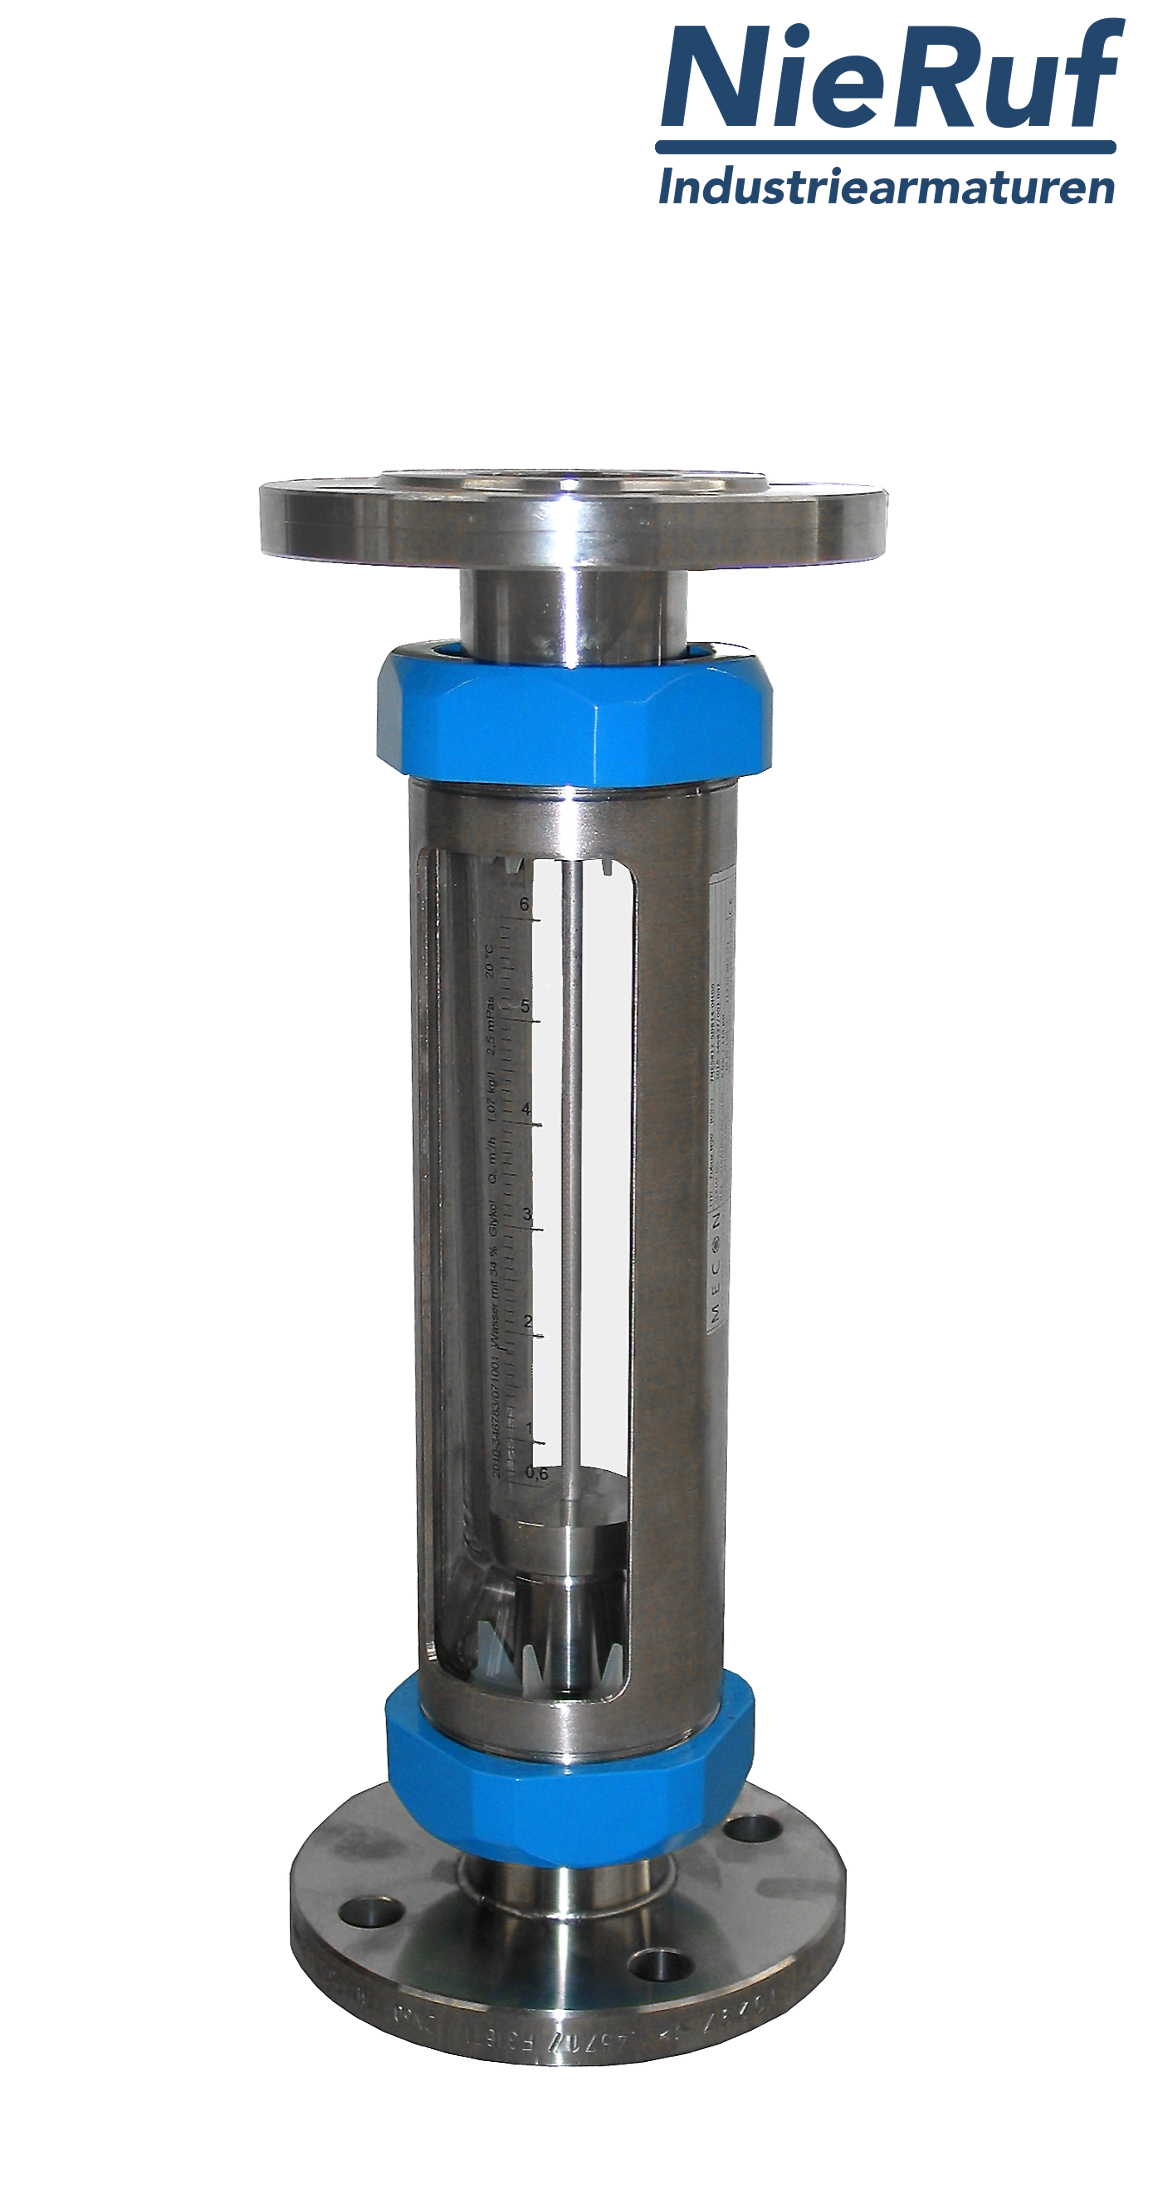 Variable area flowmeter stainless steel + borosilicate flange DN15 25.0 - 250 l/h water FKM